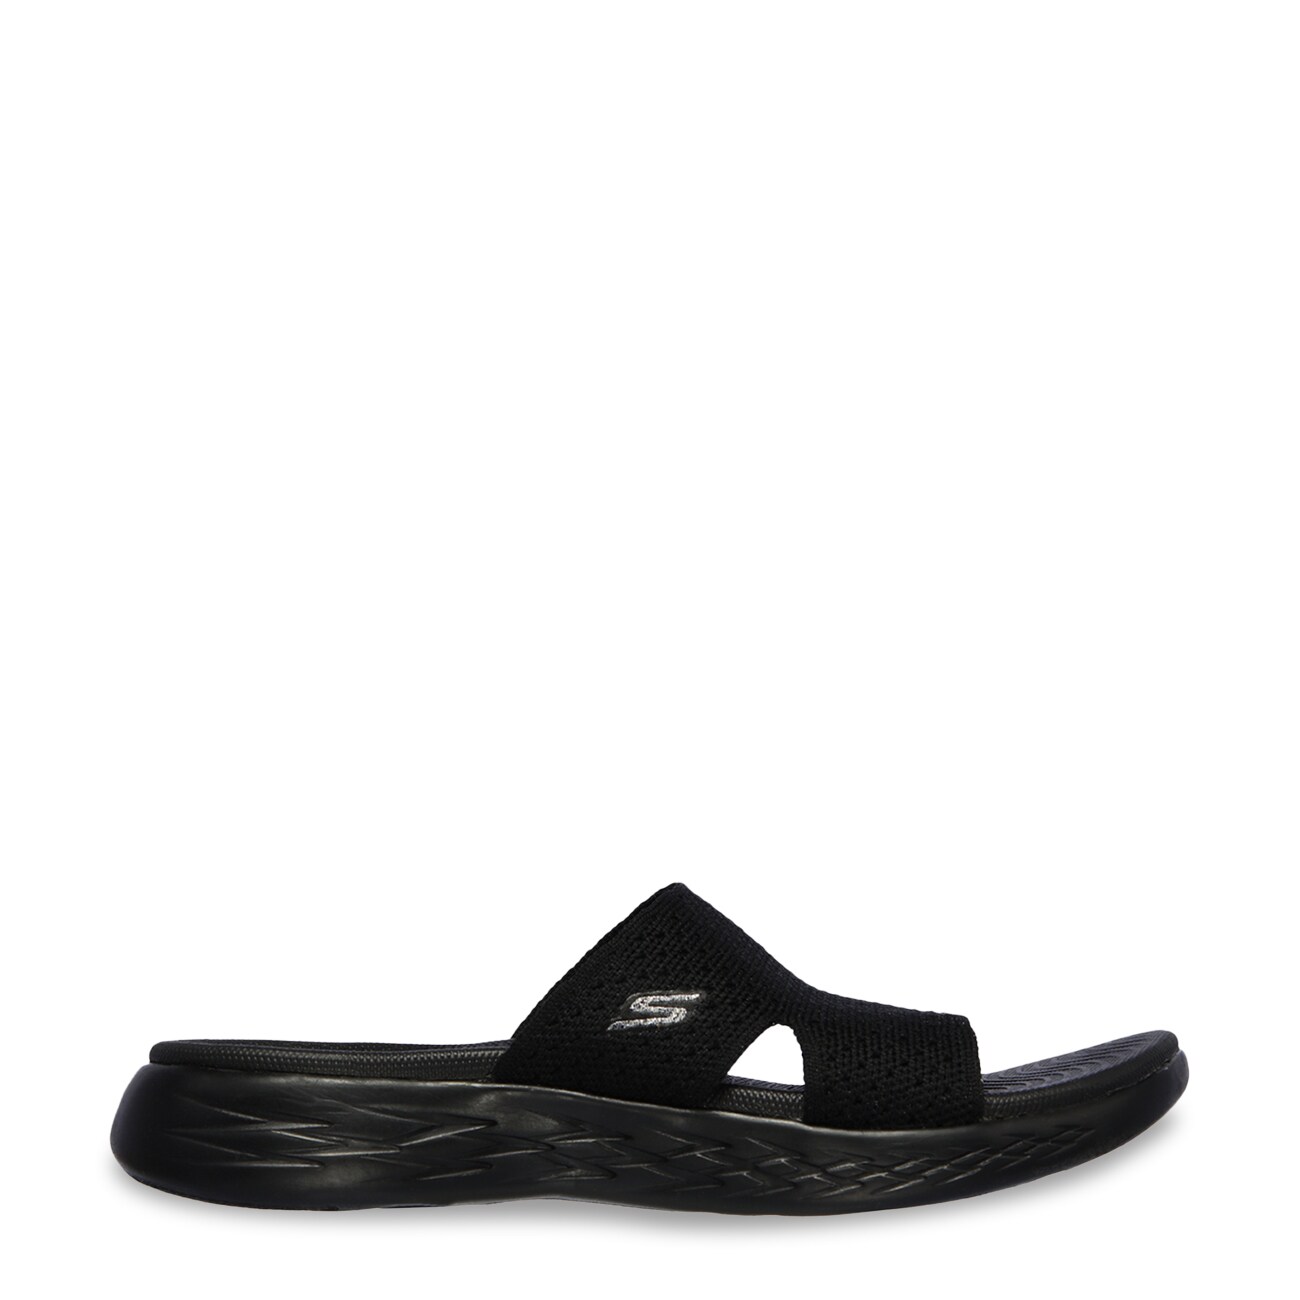 Skechers Women's On-The-Go 600 Adore Slide | The Shoe Company